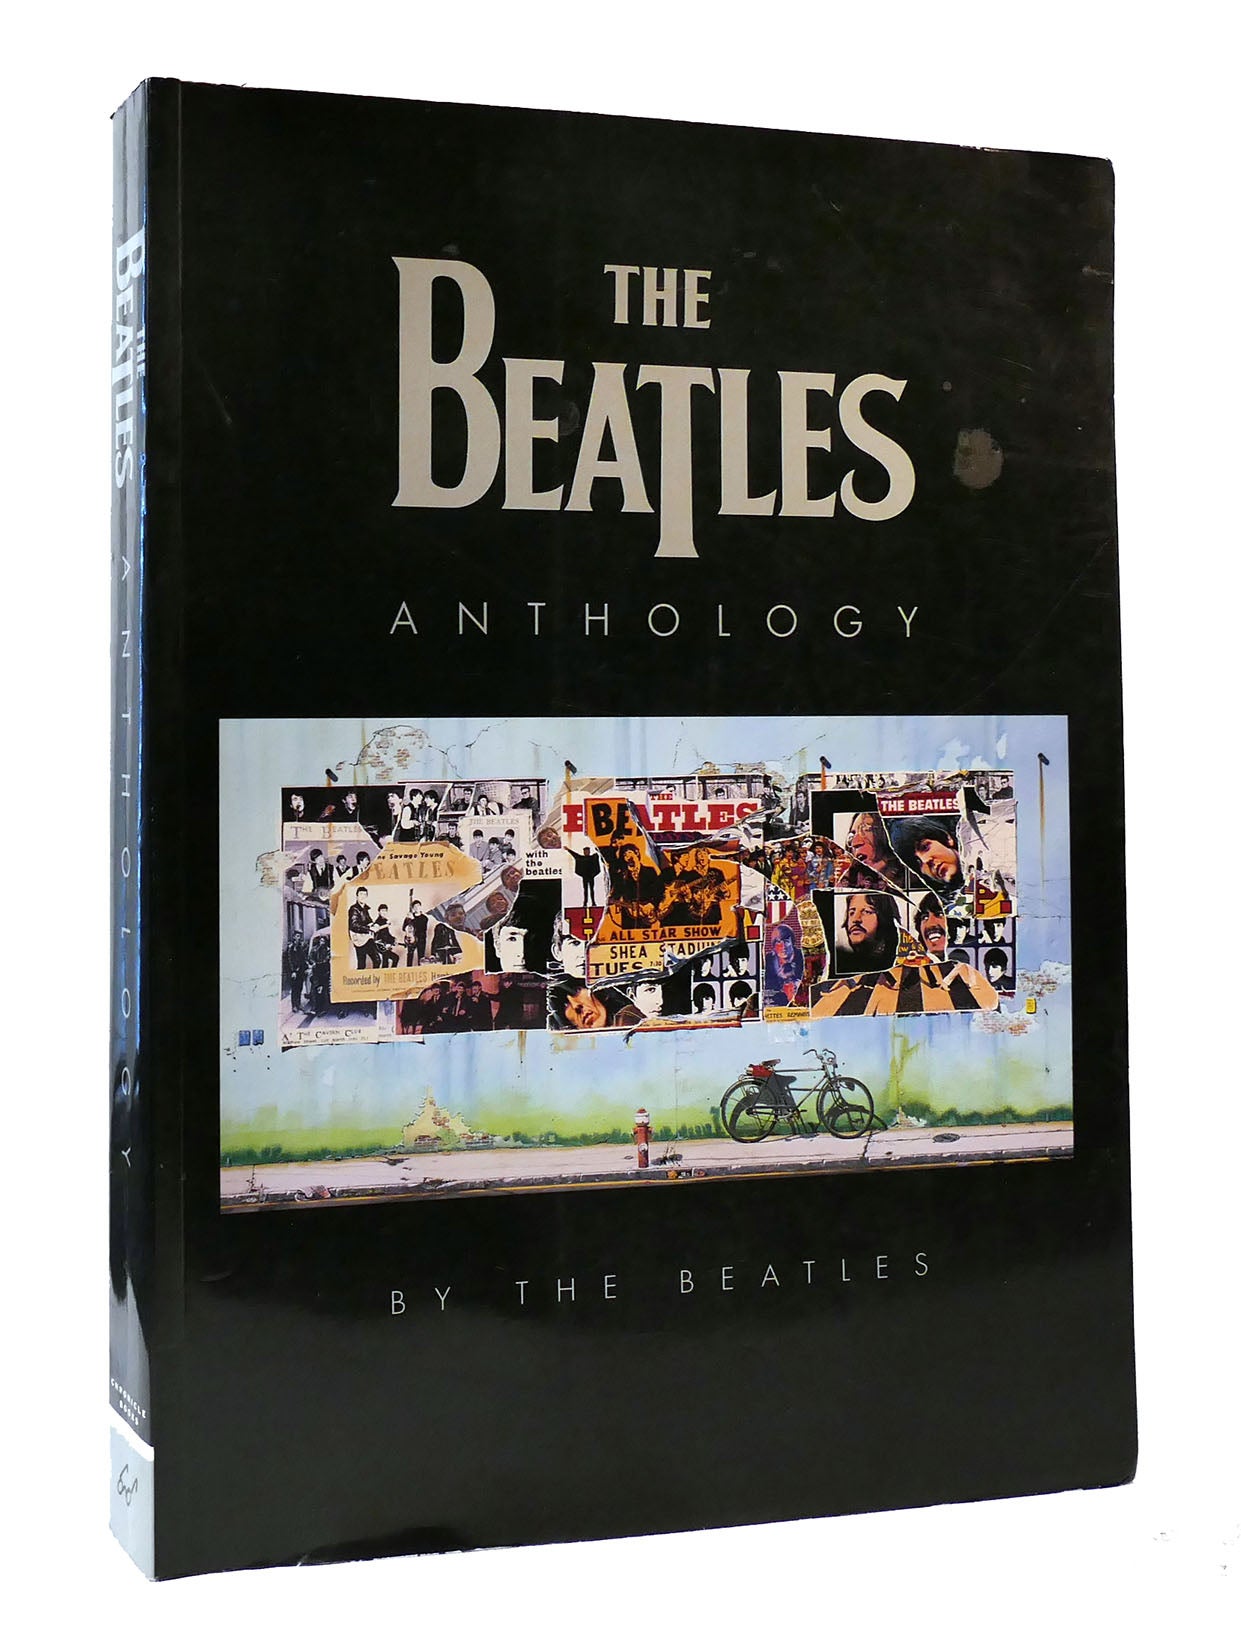 THE BEATLES ANTHOLOGY by The Beatles on Rare Book Cellar